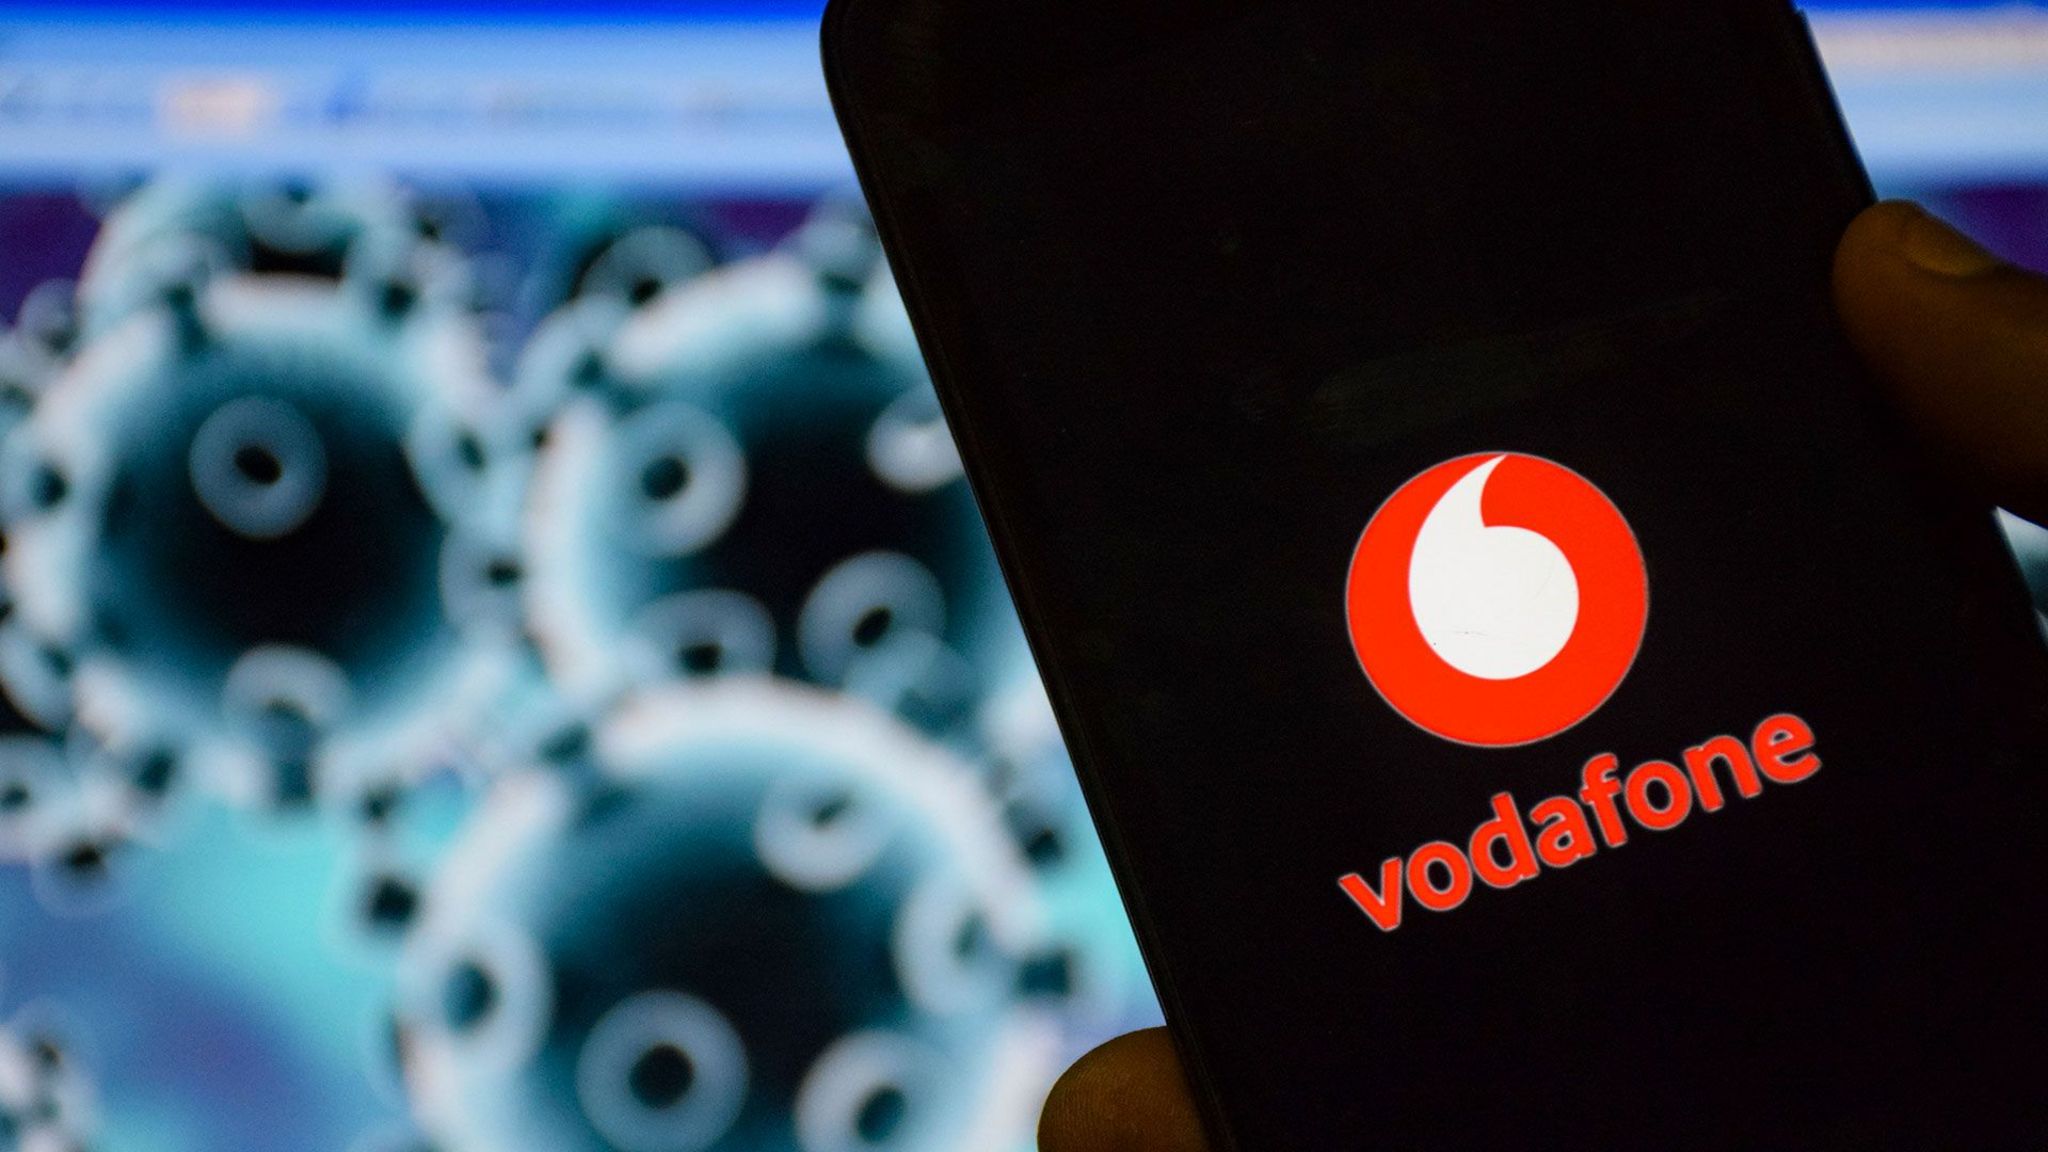 A mobile phone is seen with the Vodafone logo on it in front of an illustration of the coronavirus